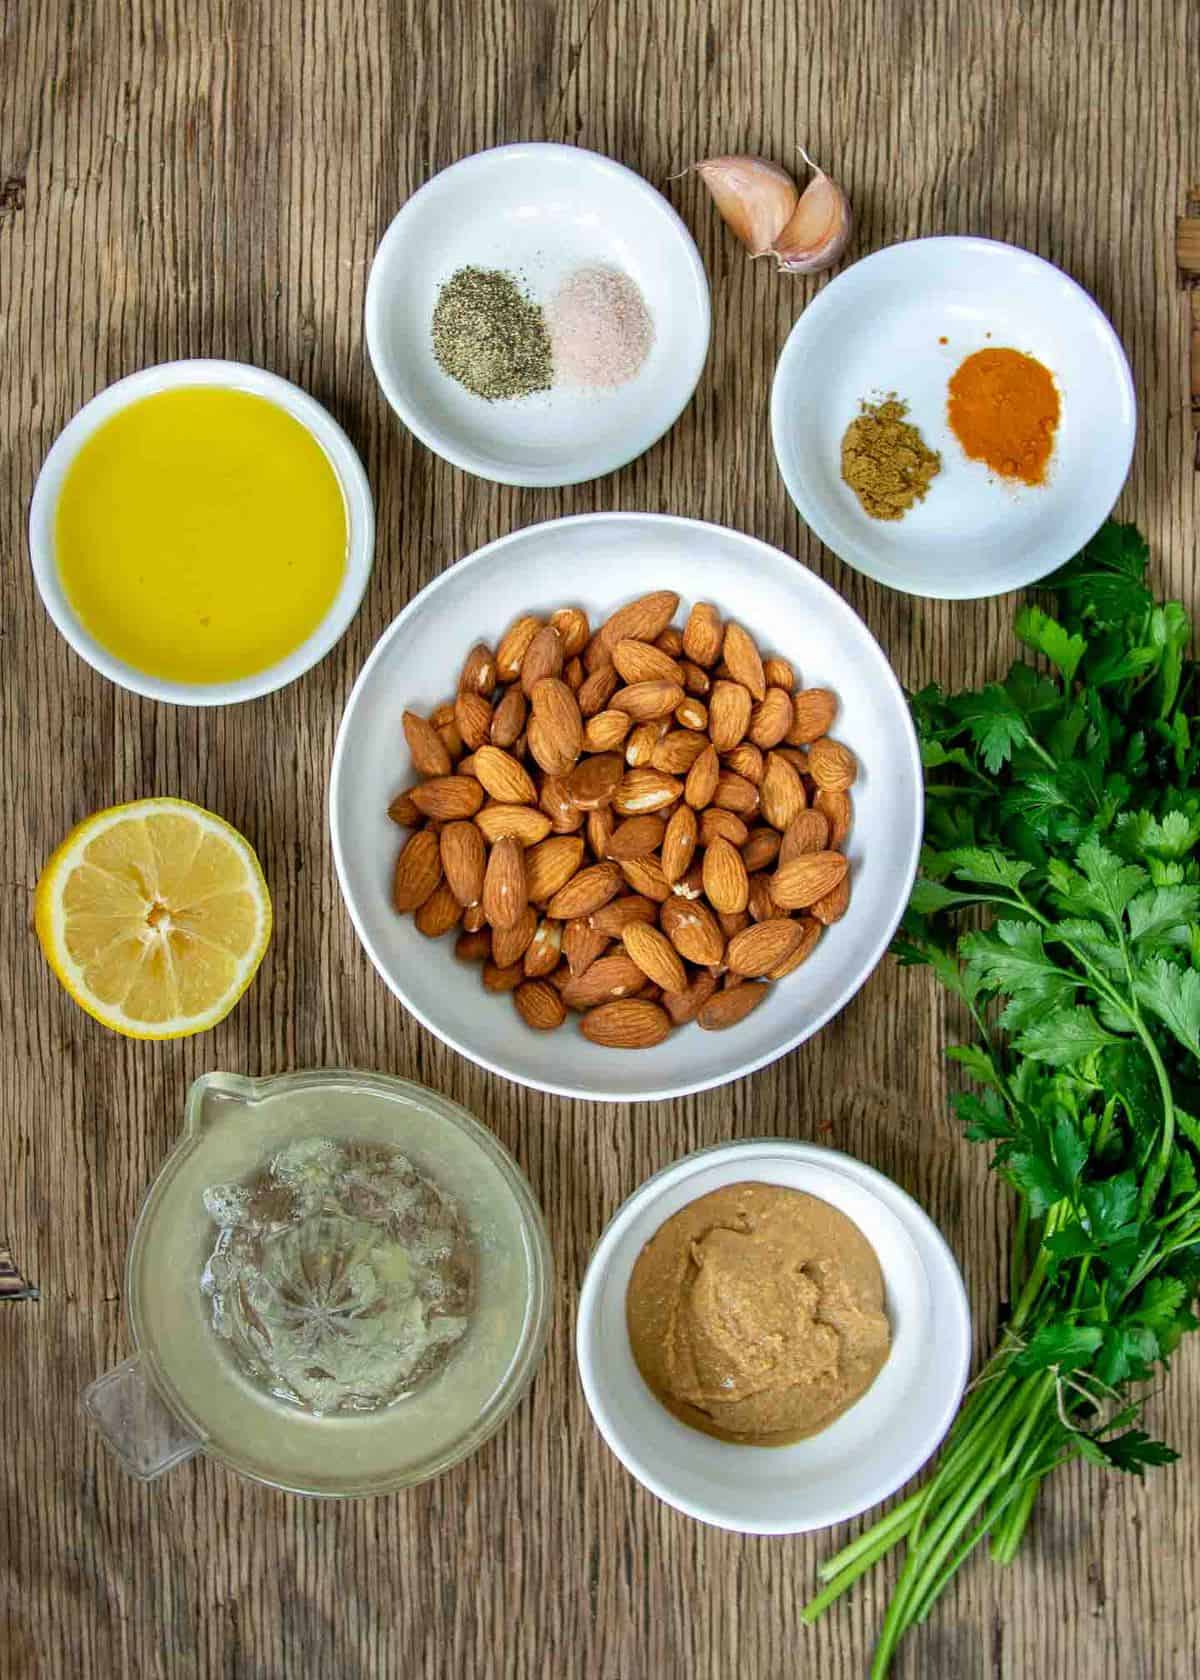 Ingredients for Raw Almond Dip: Almonds, Lemon, Tahini, Spices and Olive Oil